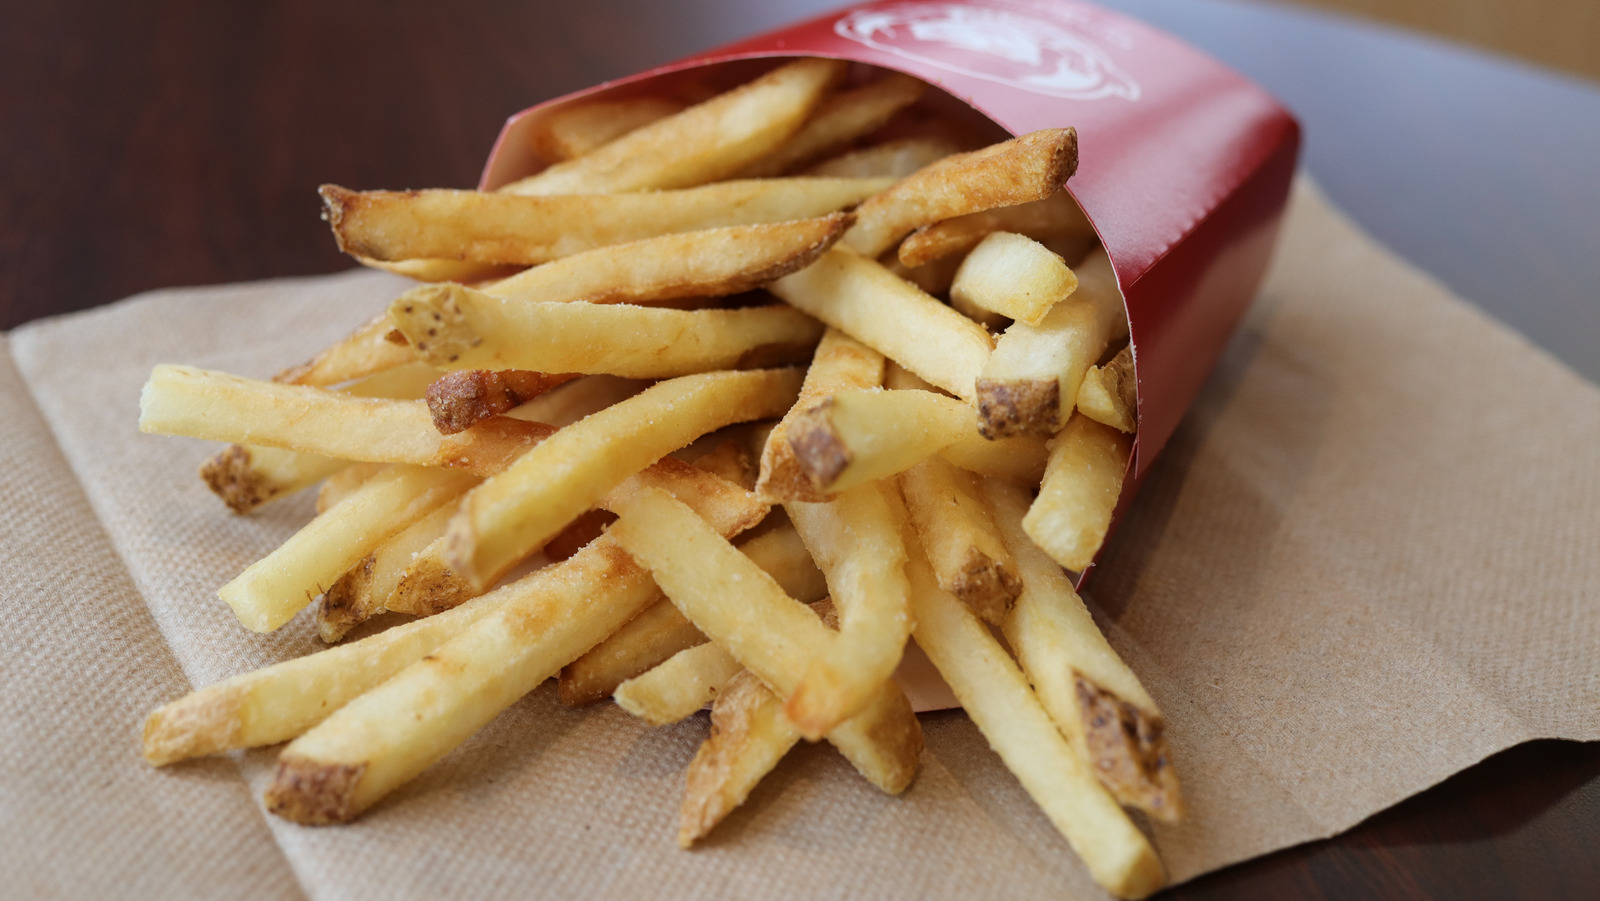 Disappointing Things - Ordering fries from home.